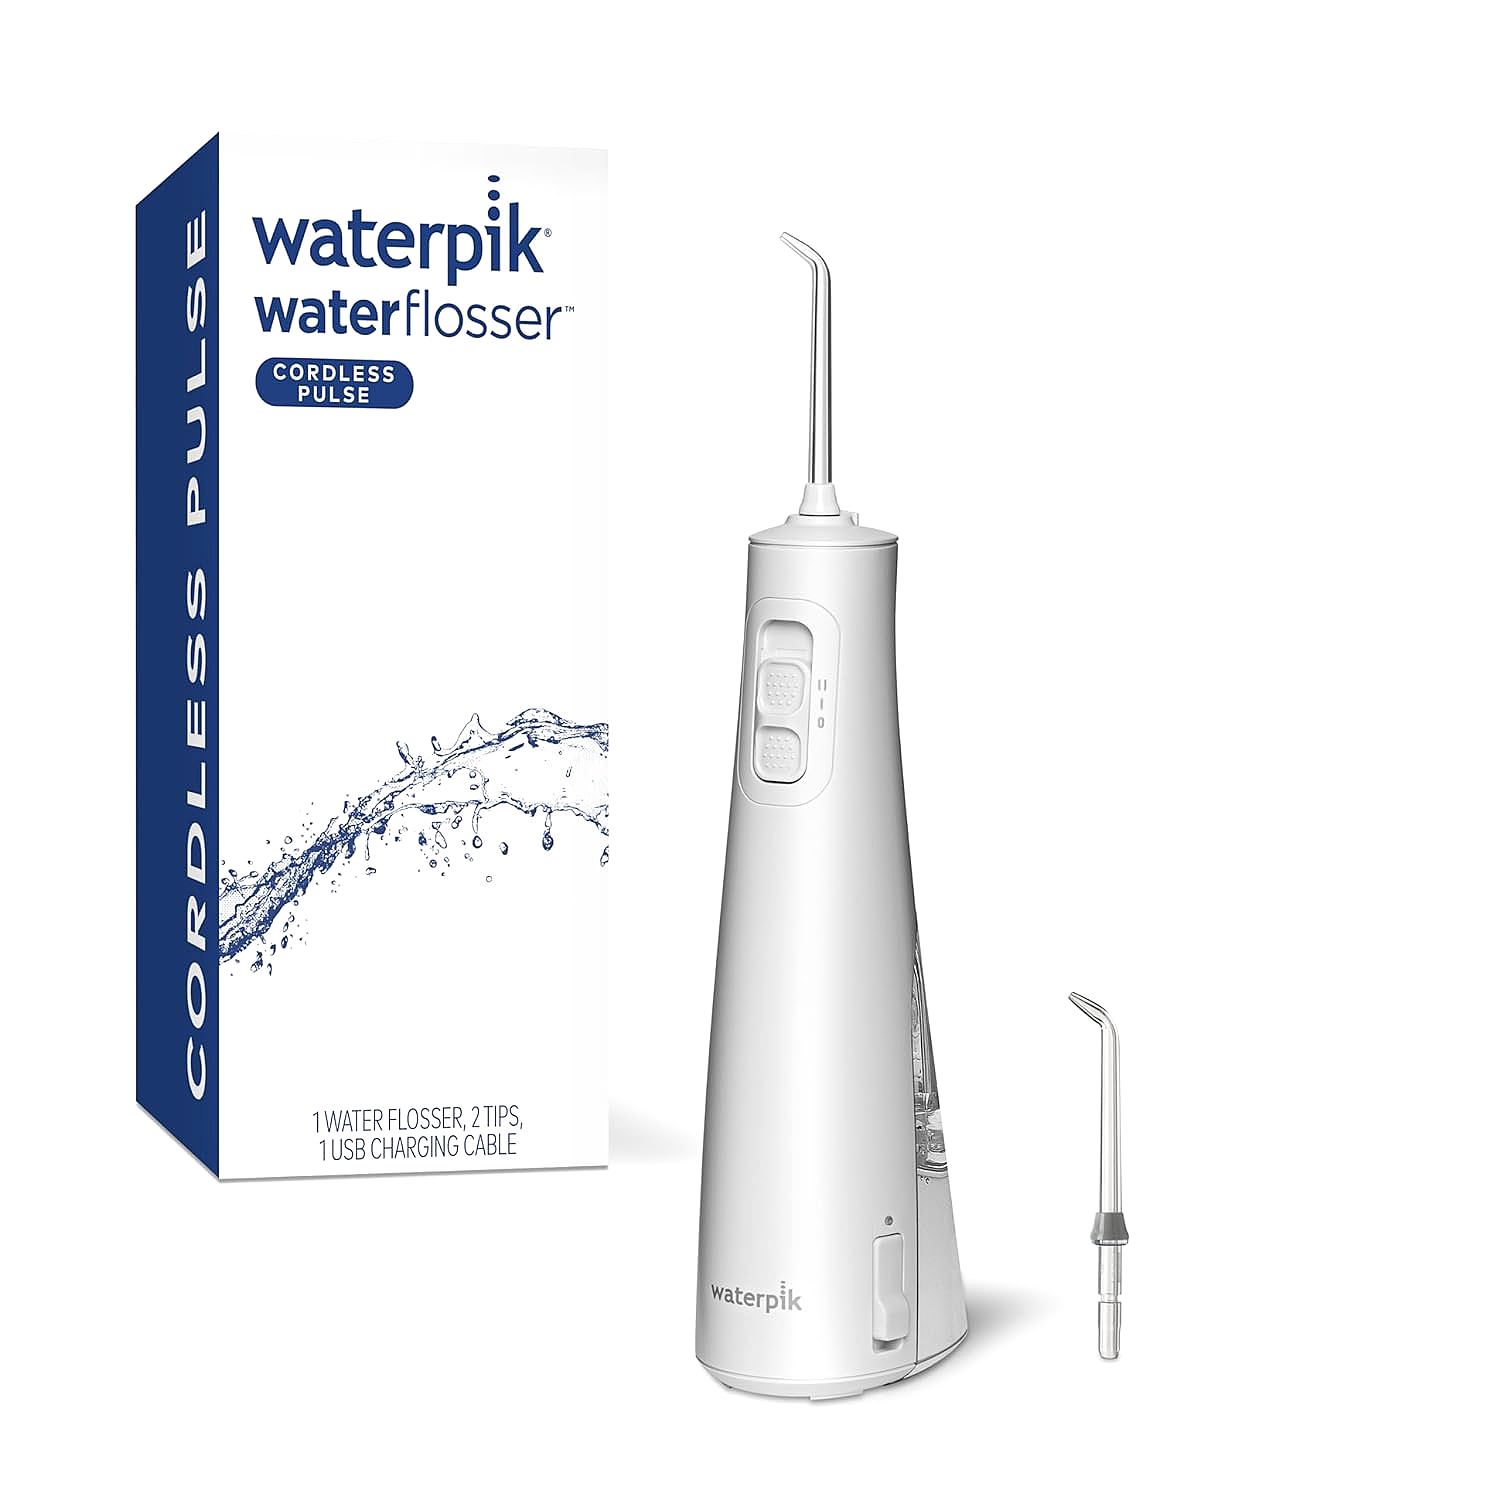 Waterpik WF-20CD010 Cordless Water Flosser: The Must-Have Portable Oral Care For Travel